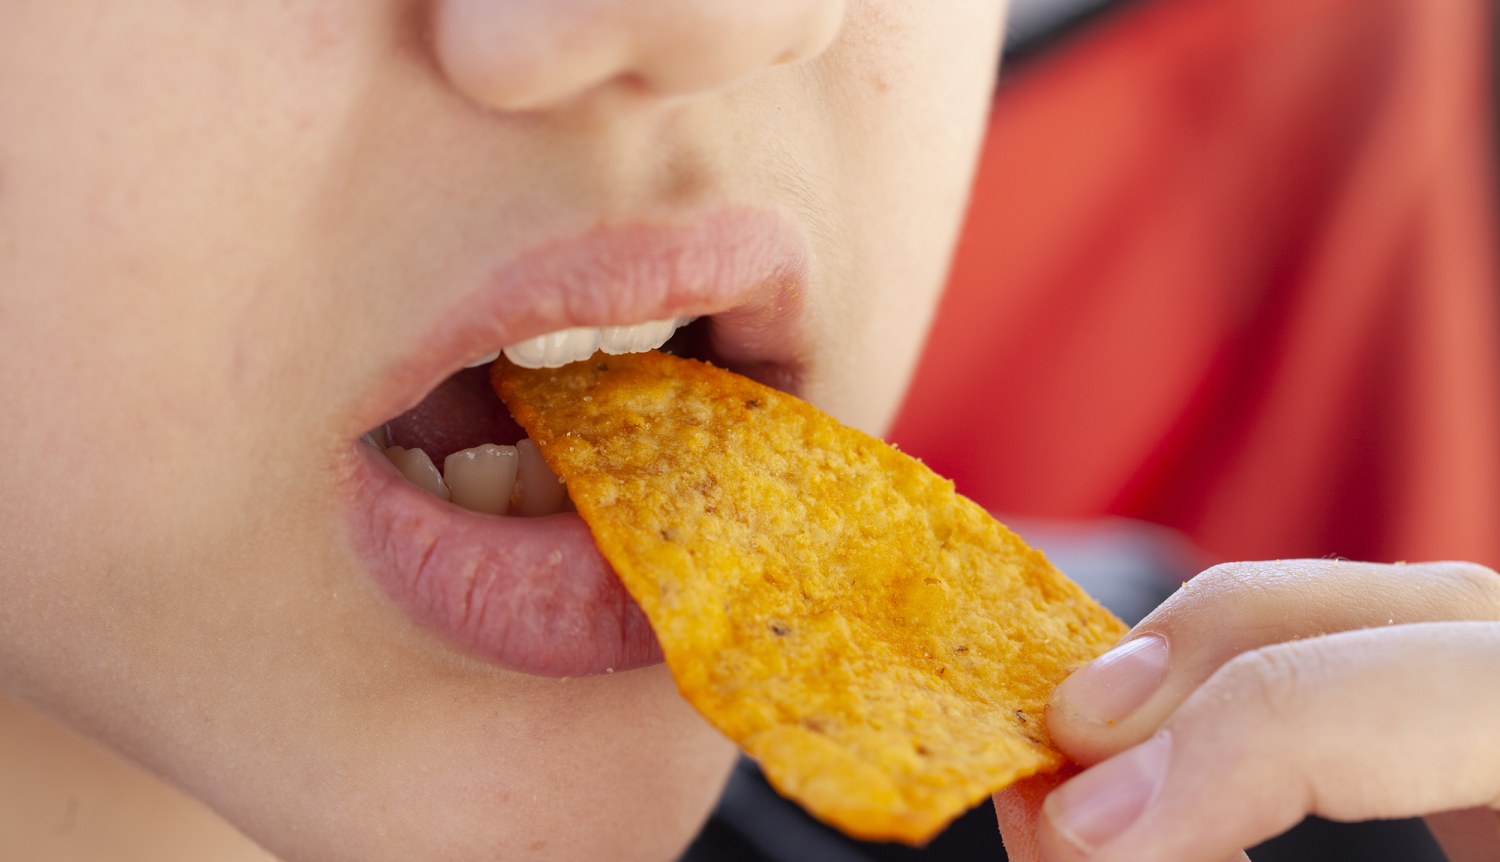 What Parents Need To Know About The 'One Chip Challenge